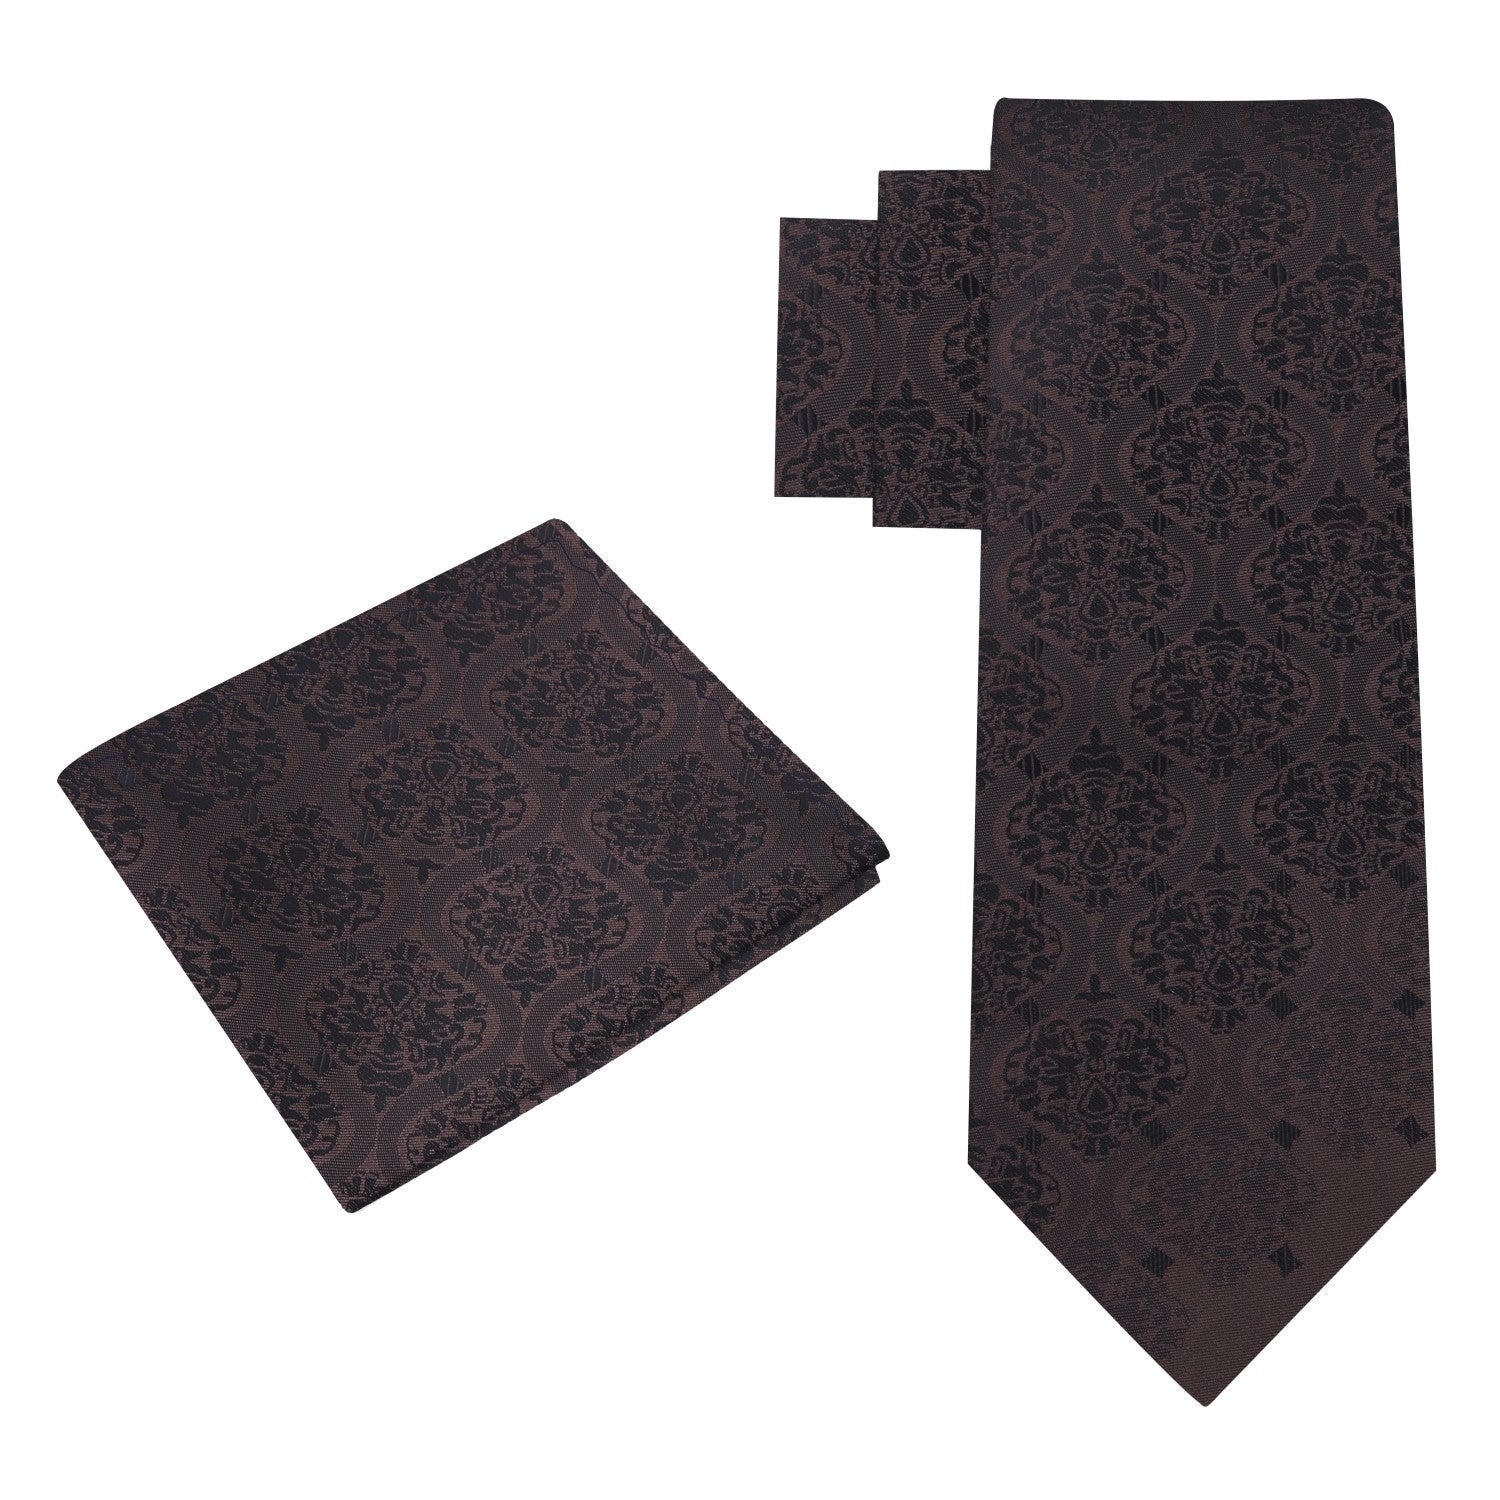 Alt View: Shades of Brown Abstract Tie and Pocket Square